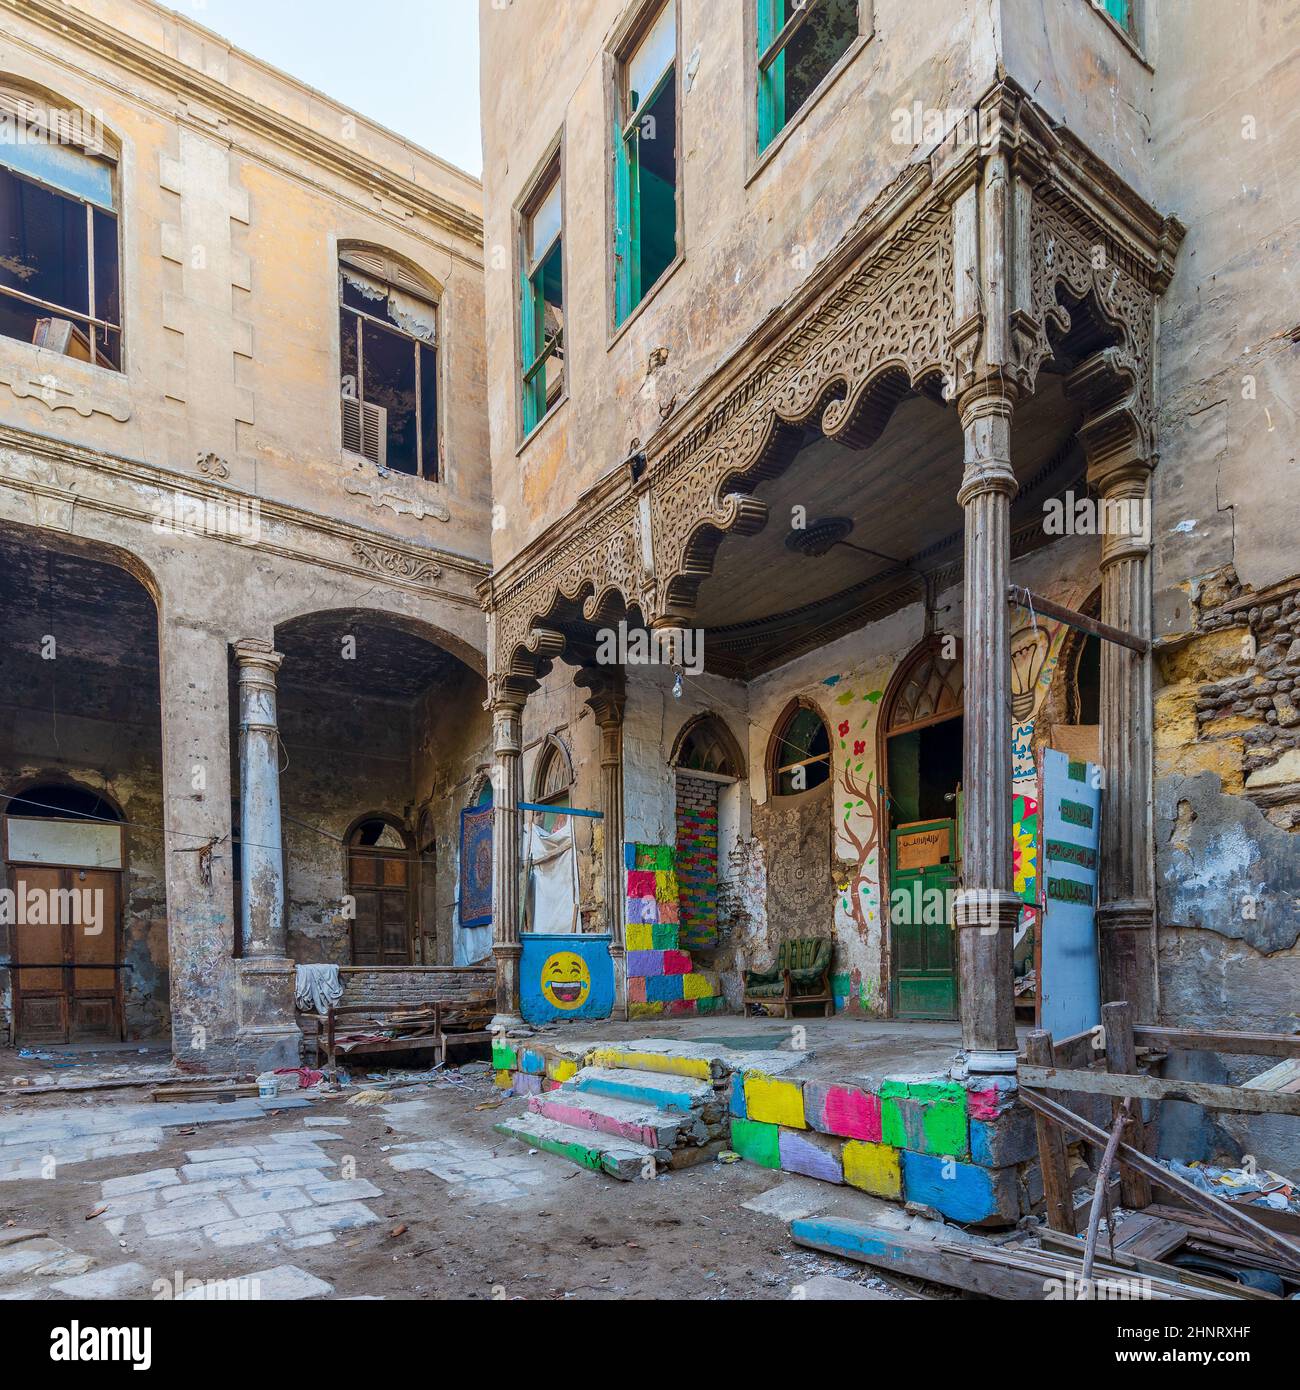 Bayt Madkour Pasha: Historical abandoned house located at Souq Al Selah Street, Darb Al Ahmar district, Old Cairo Stock Photo